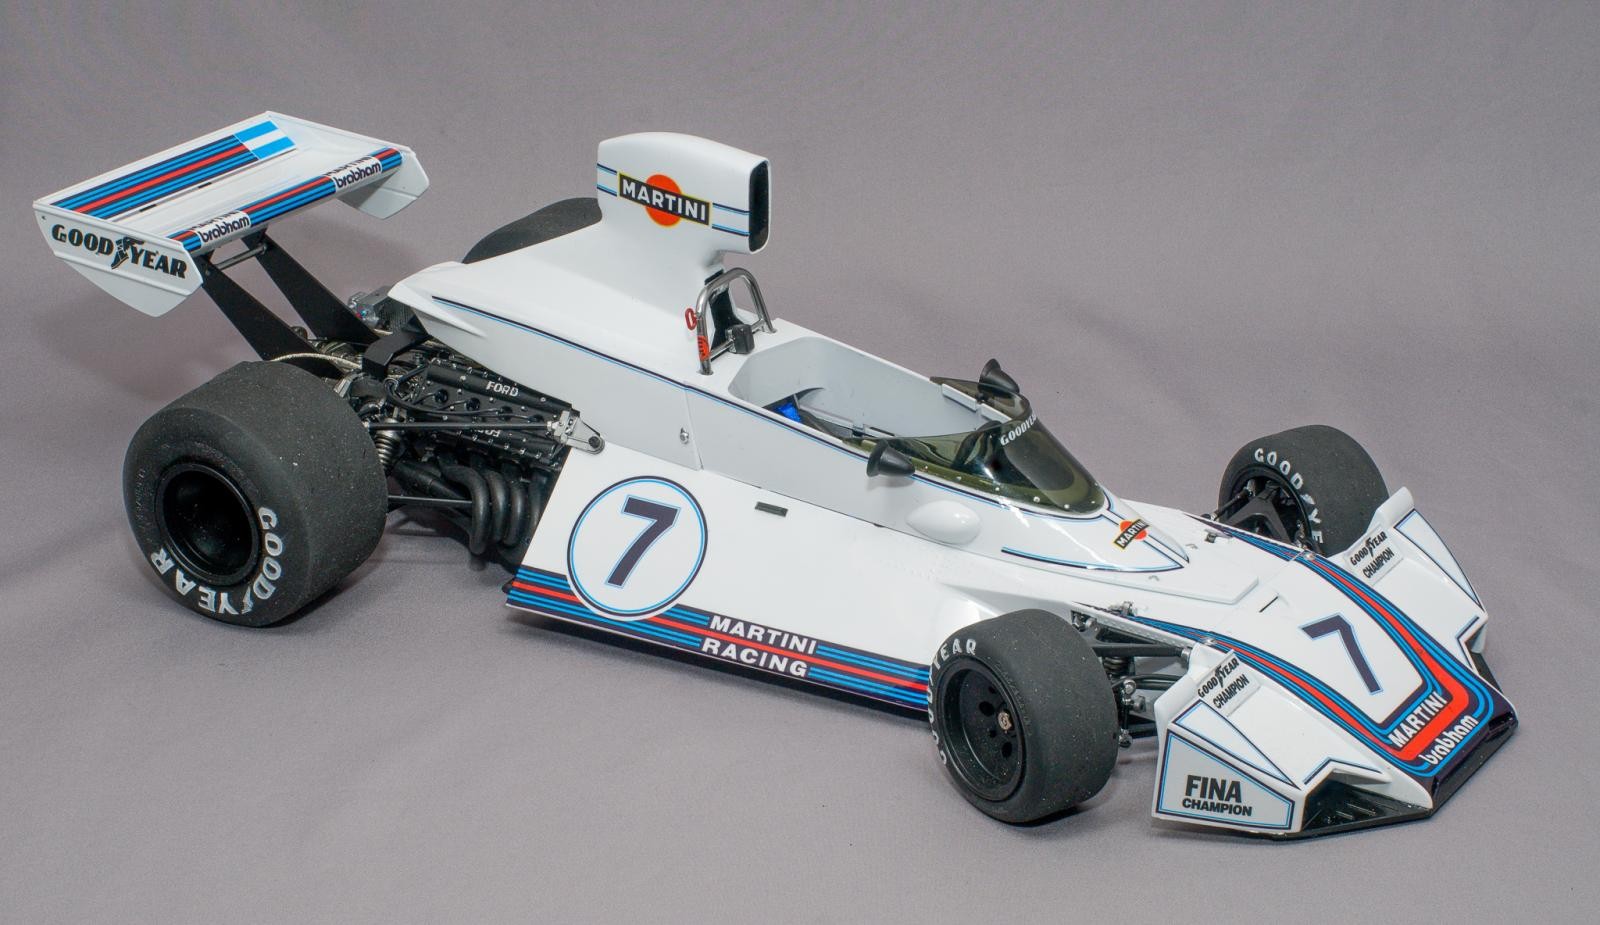 Tamiya 1/12 Scale Martini Brabham BT44B Formula 1 Car Unboxing and Review 